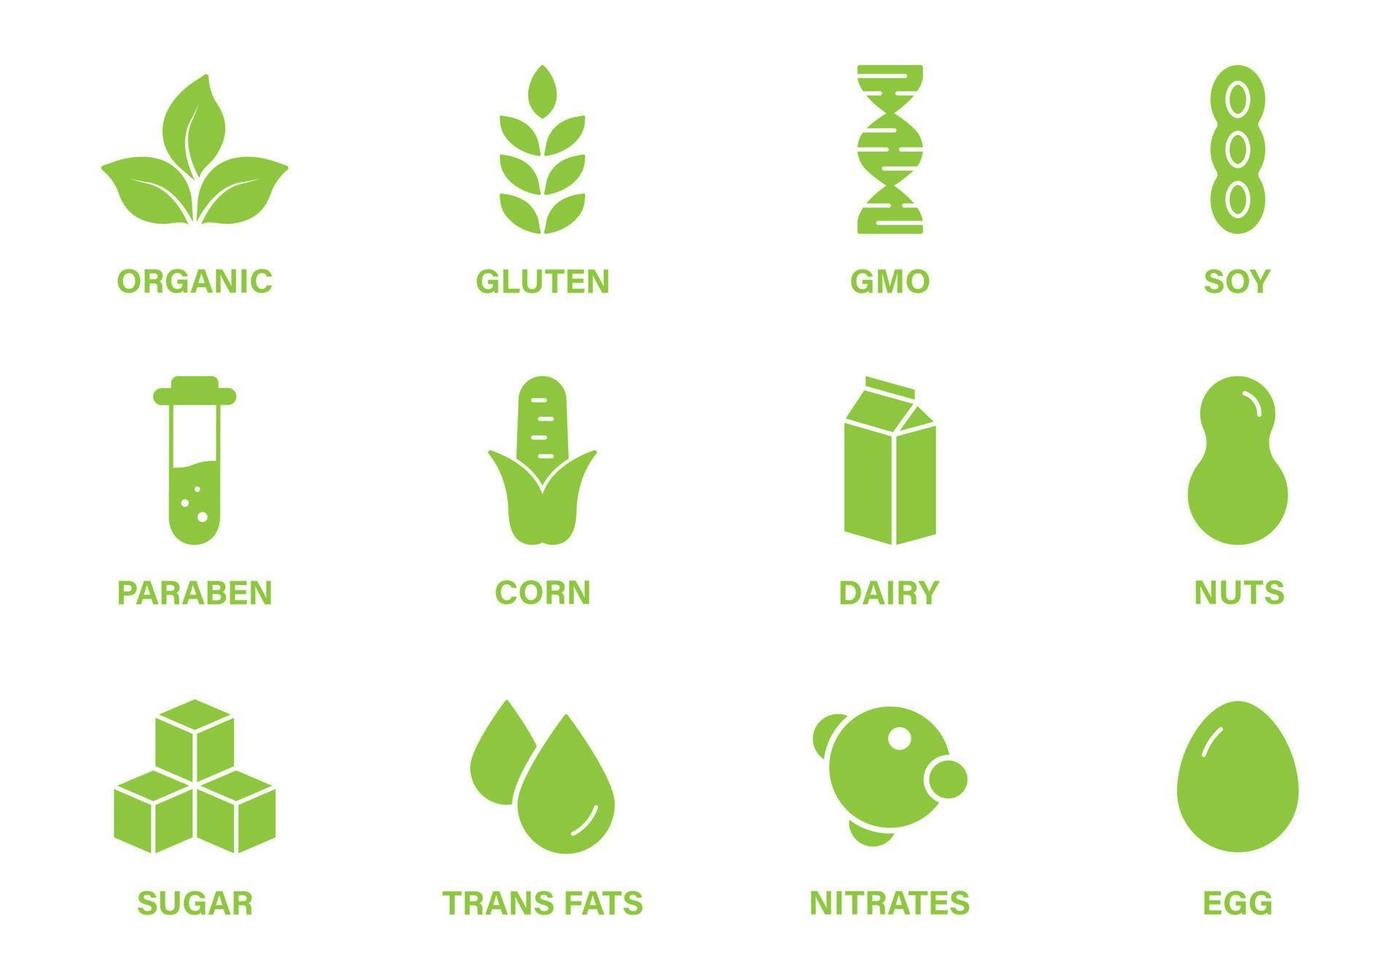 Vegan Food Product Silhouette Green Icon Set. Organic Allergy Ingredient Sign. Gluten, Sugar, Trans Fat, Corn, GMO, Dairy, Nitrates, Soy, Milk, Nuts, Egg and Paraben. Isolated Vector Illustration.